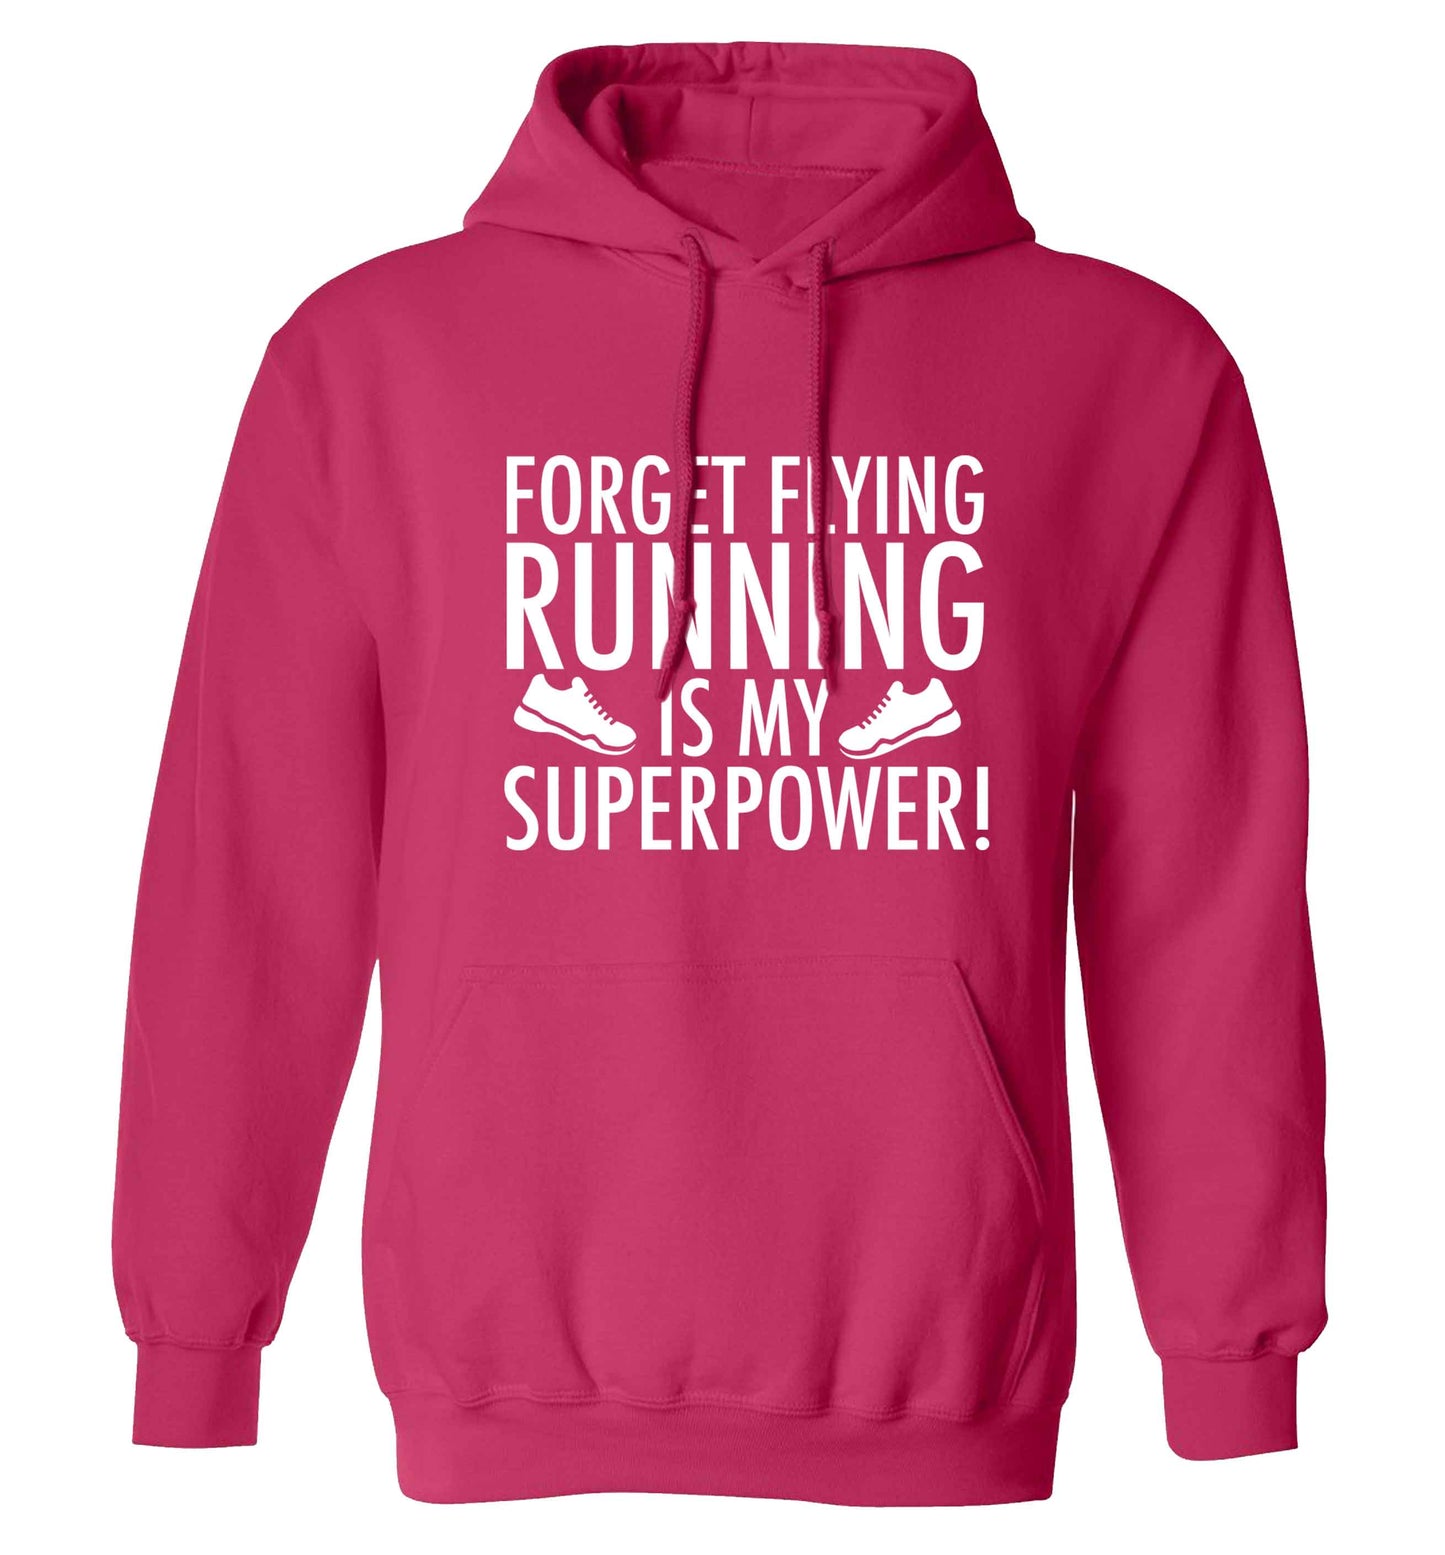 Forget flying running is my superpower adults unisex pink hoodie 2XL